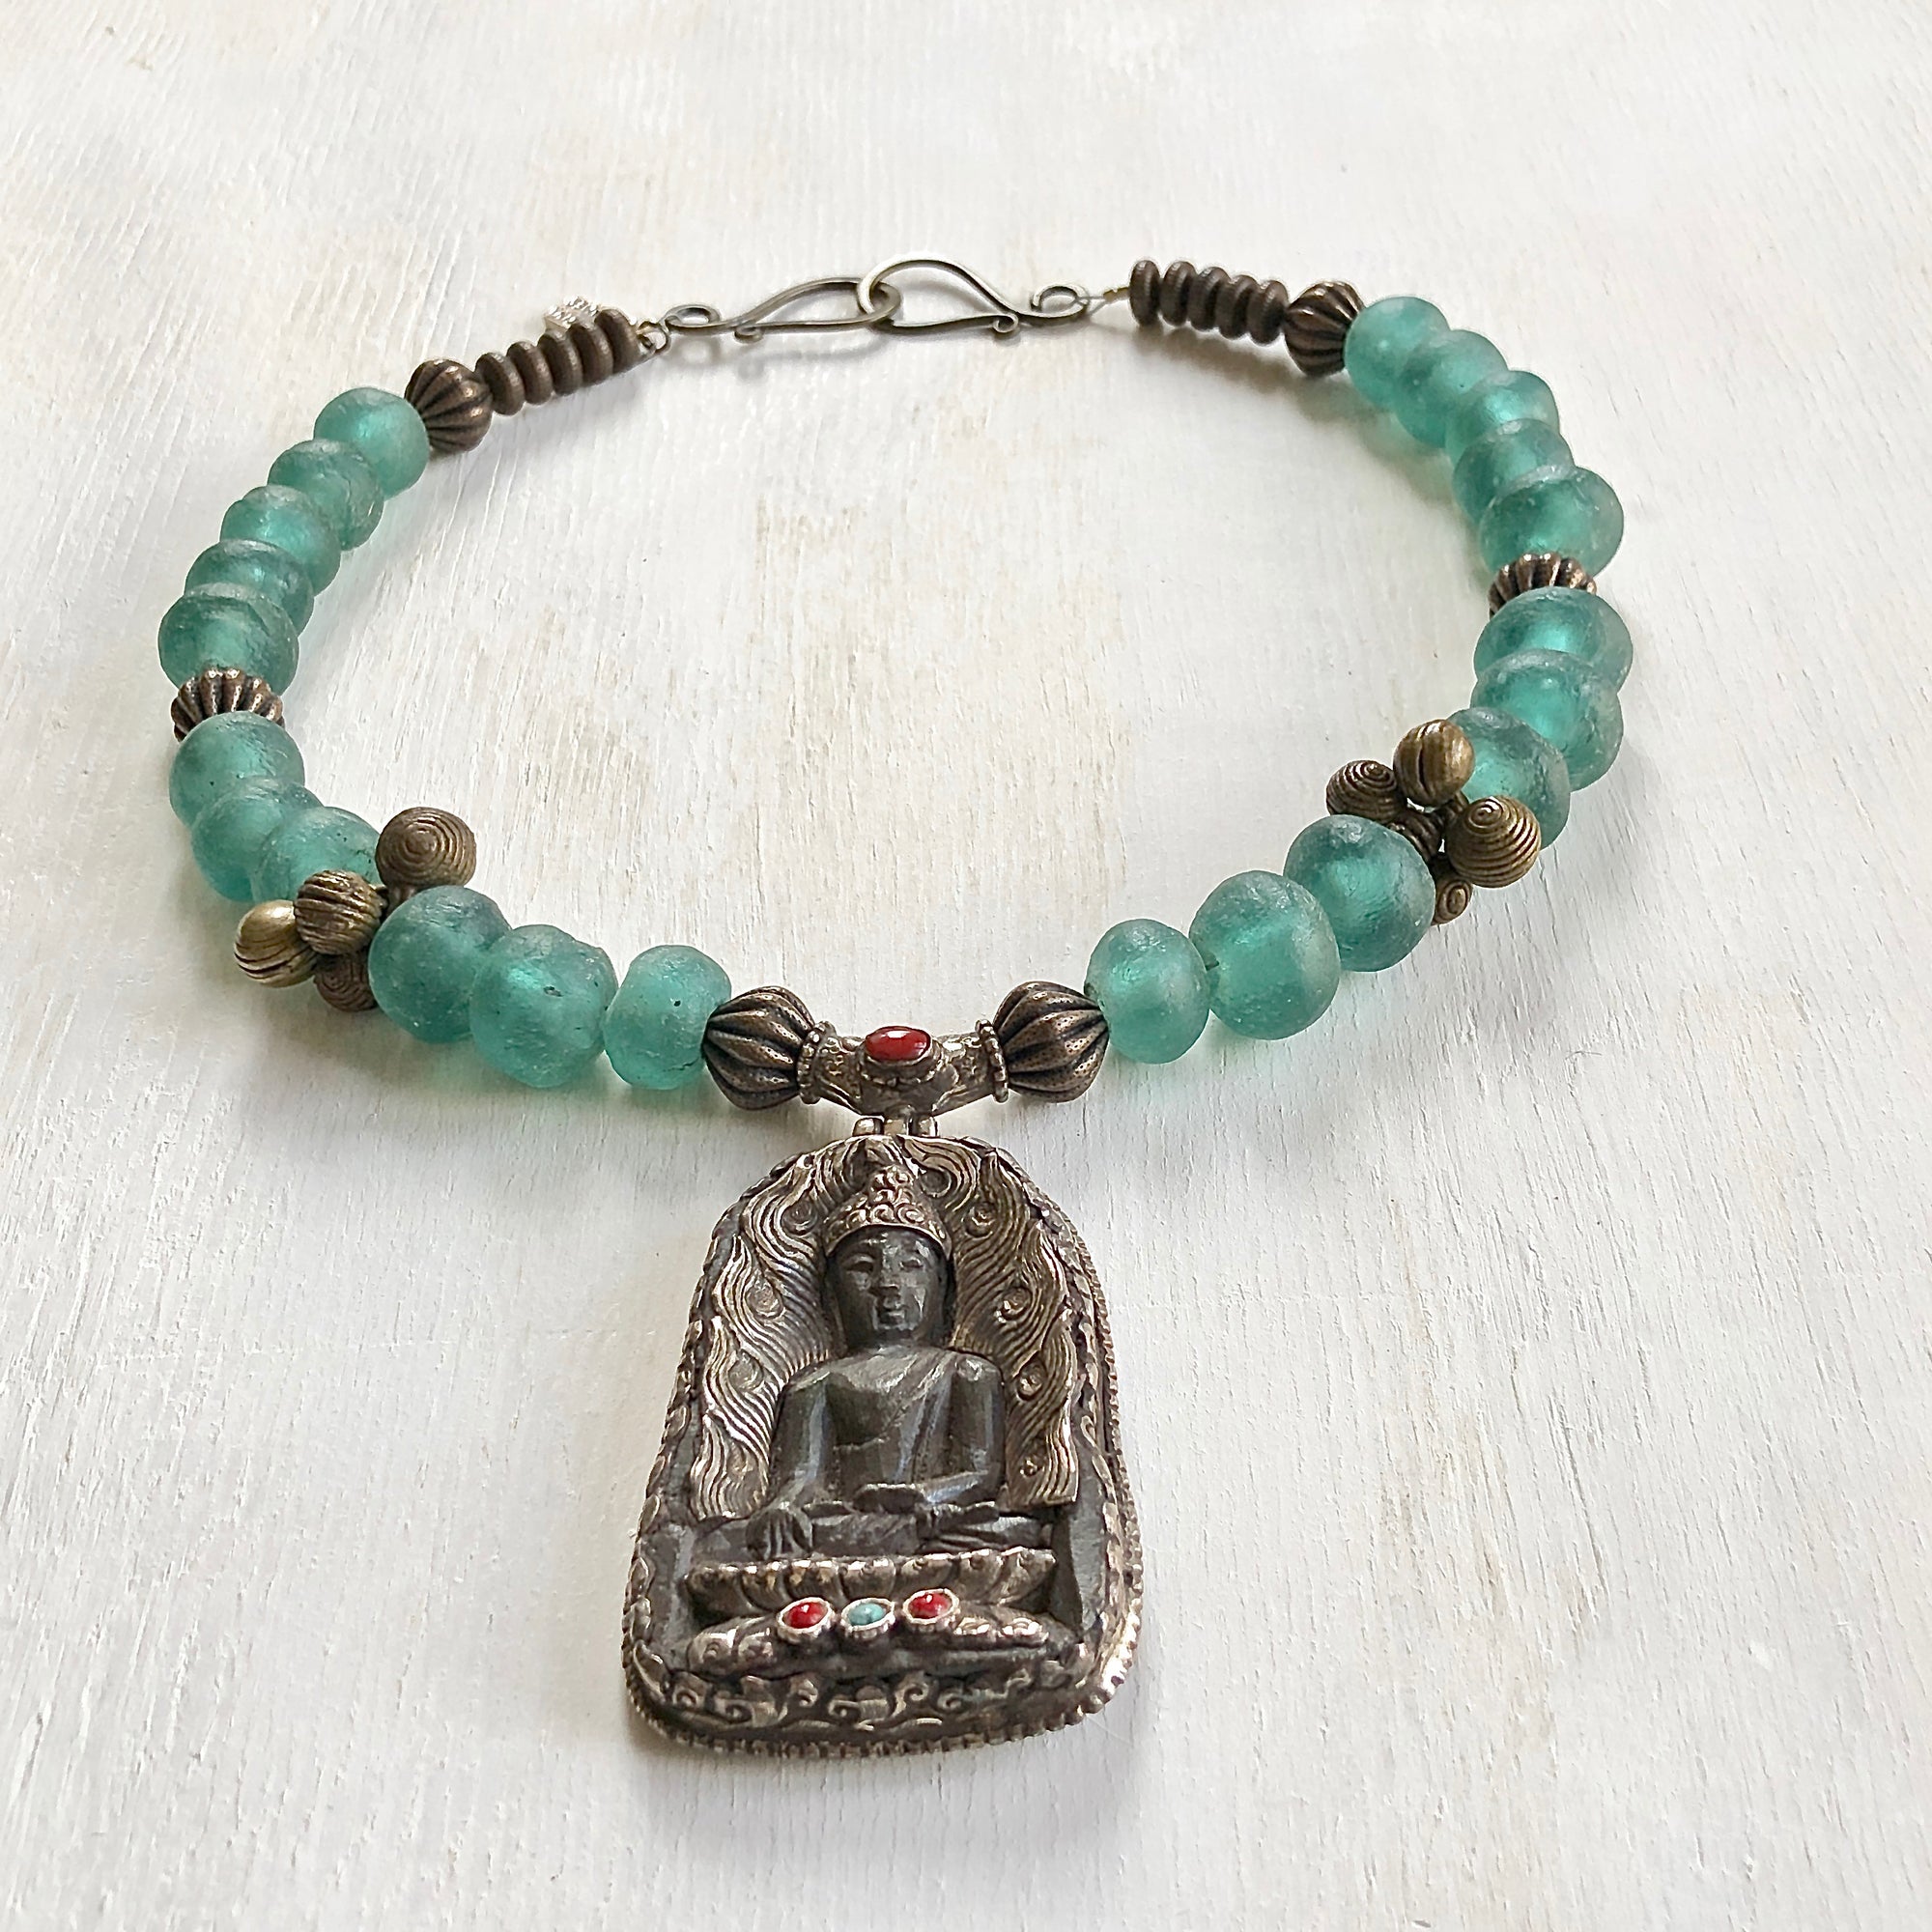 Nepalese Buddha African recycled beads necklace. Cristina Tamames Jewelry Designer